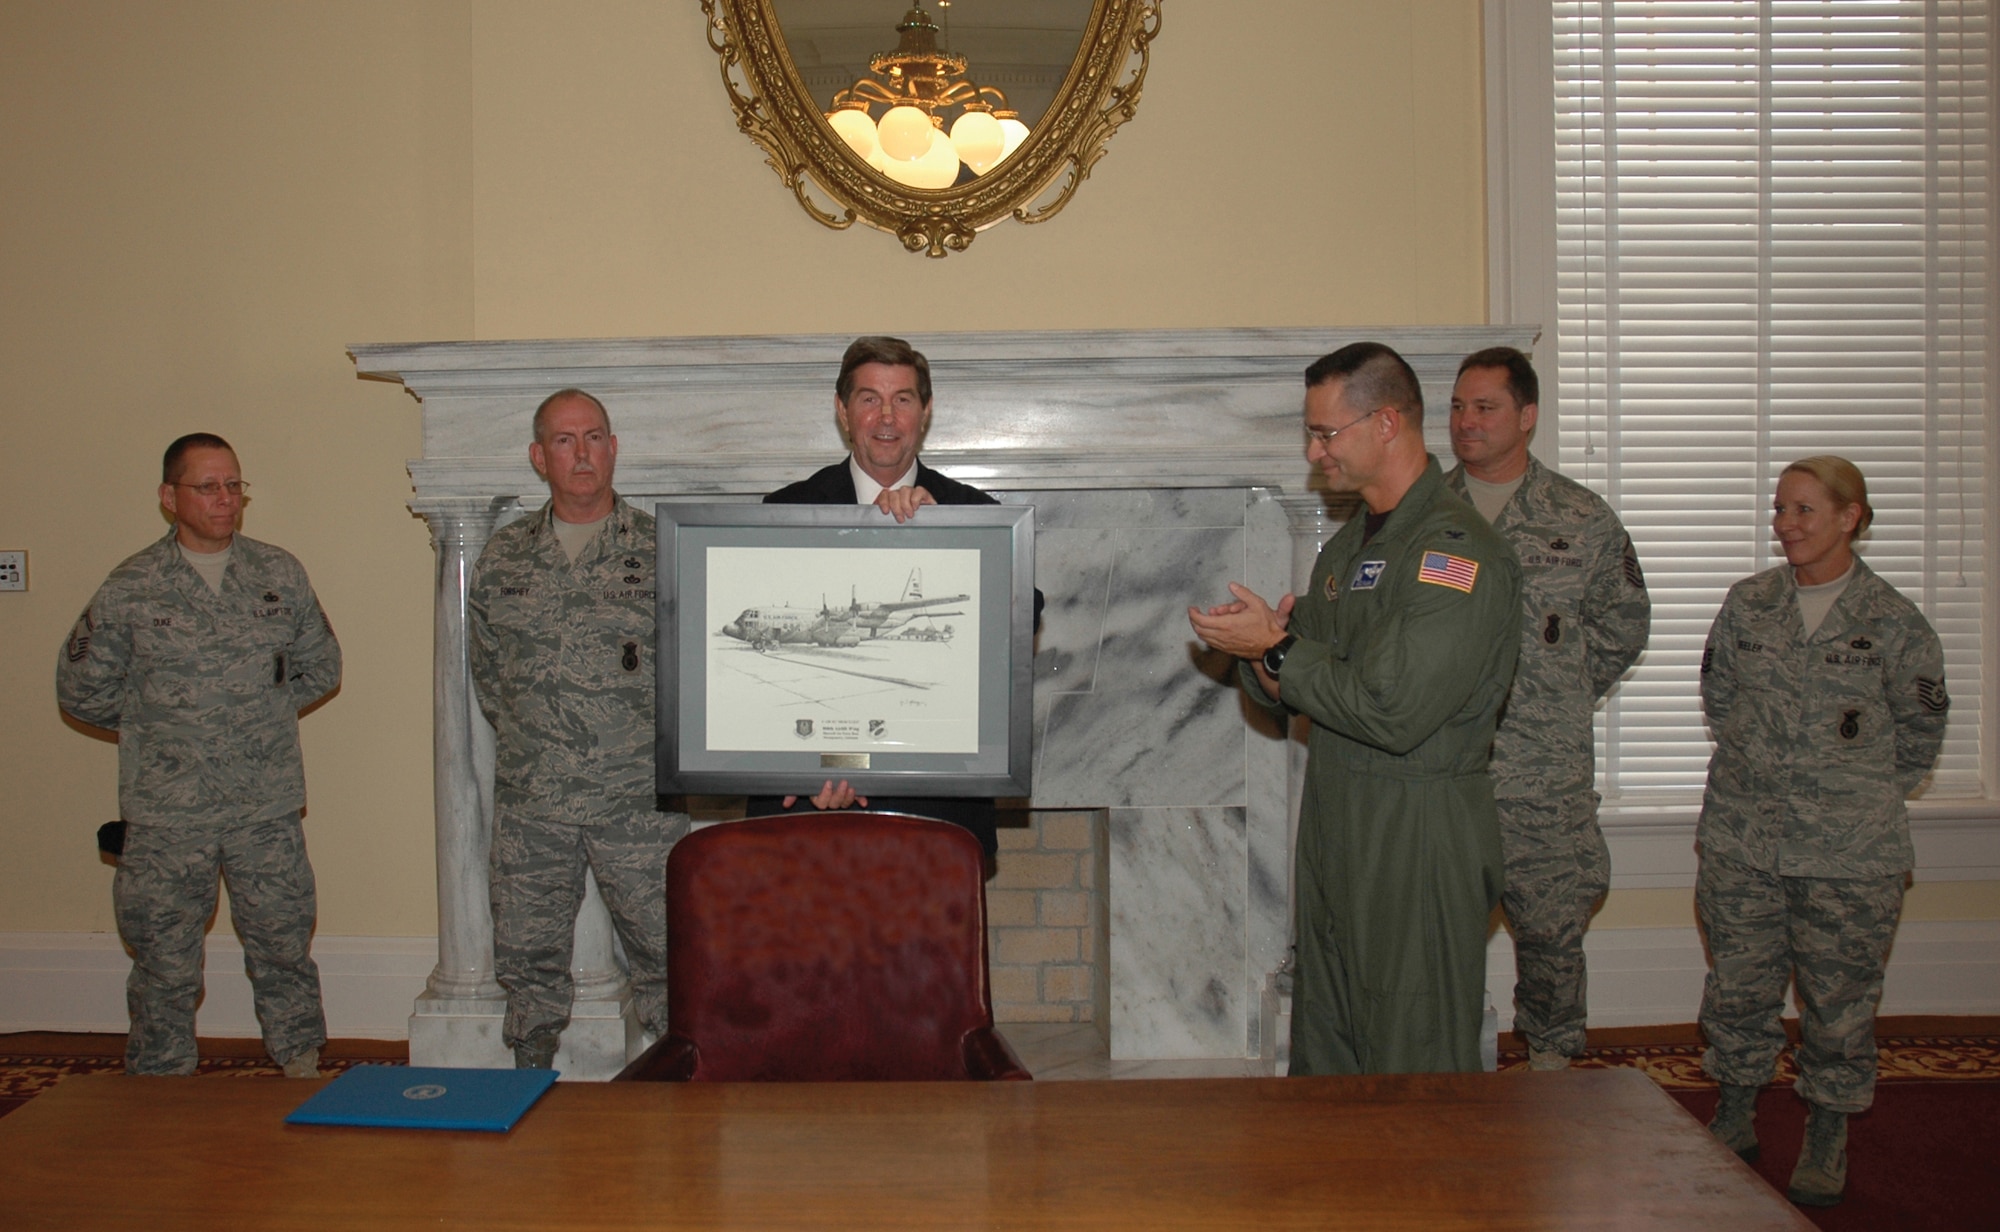 Ala. Gov. Bob Riley, center, displays a limited edition, framed and engraved print of a 908th Airlift Wing C-130 presented to him by 908th AW Commander Col. Brett J. Clark and formerly deployed security forces members Nov. 20.  The 908th AW contingent also presented the governor with a U.S. flag that flew over an observation post staffed by unit security forces members while deployed to Kirkuk, northern Iraq. The reservists were on hand as the governor unveiled a new initiative to provide more help to the state's returning warriors. The remaining members are (from left) Senior Master Sgt. Owen Duke, former 908th Mission Support Group Commander Col. William Forshey, Master Sgt. Tim Oliver and Tech. Sgt Kelly Beeler. (U.S. Air Force Photo by Lt. Col. Jerry Lobb)         